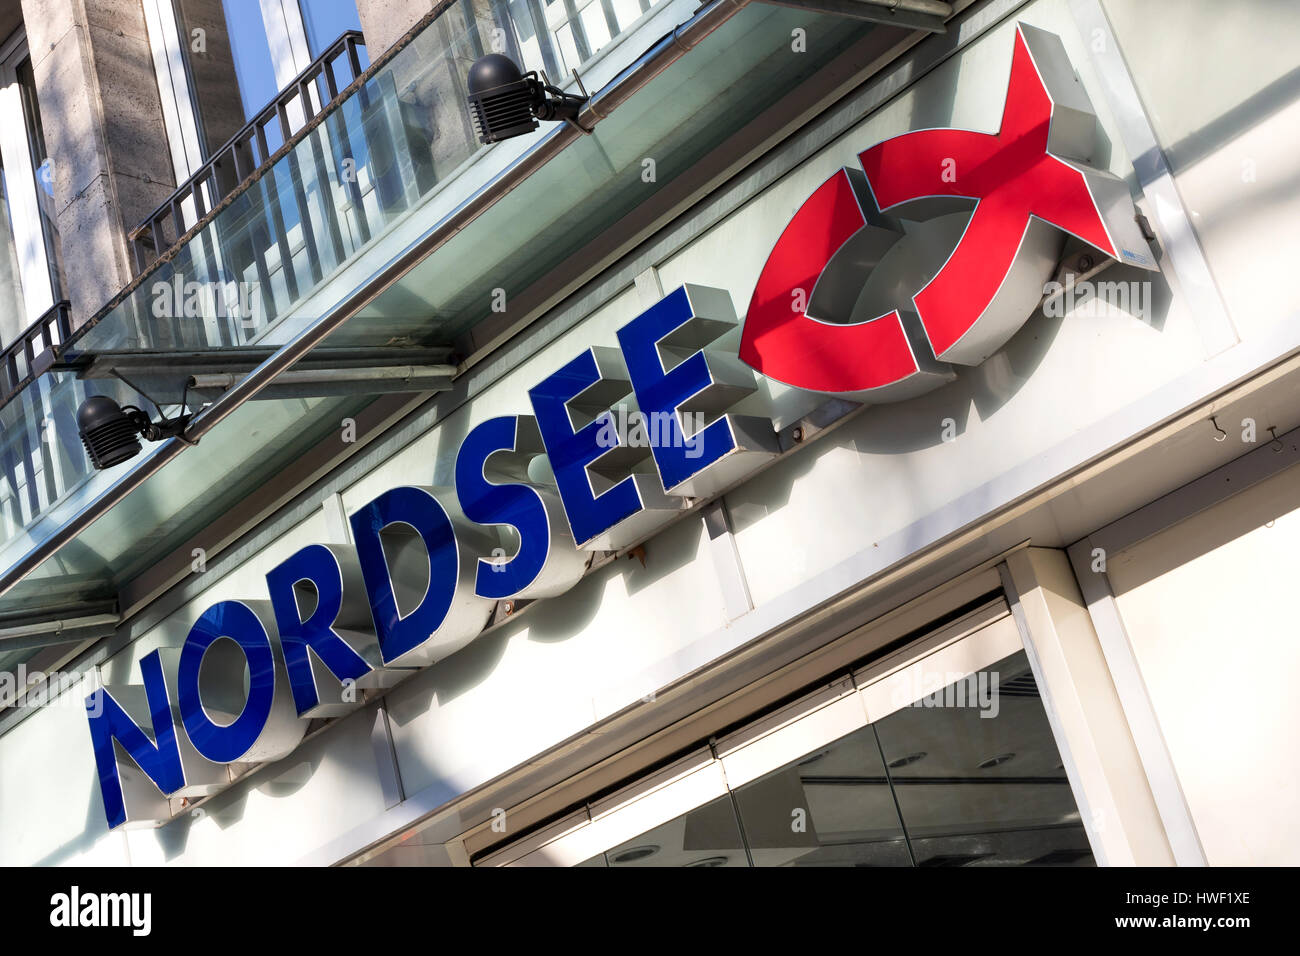 Nordsee restaurant. Nordsee is a German fast food restaurant chain specialized in seafood. Stock Photo